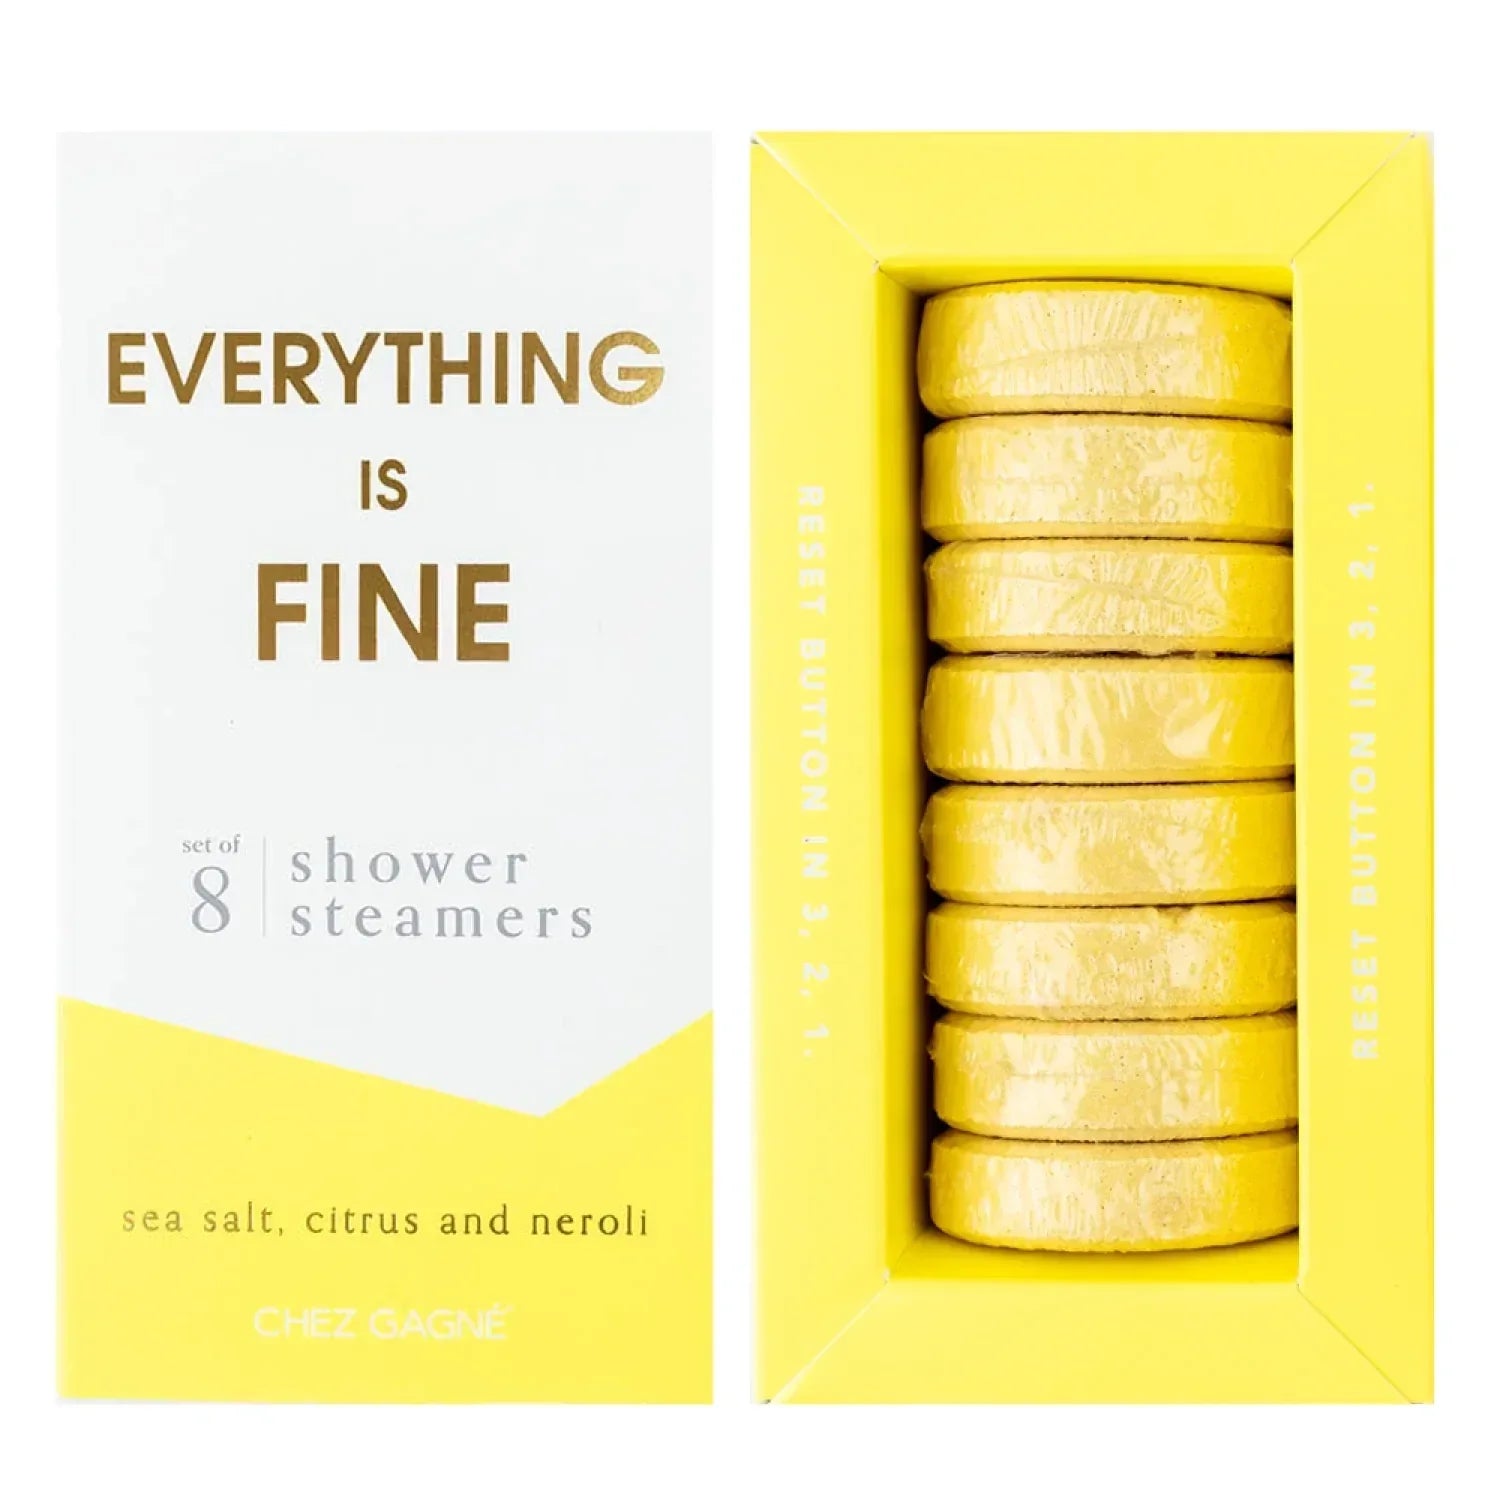 Chez Gagné 10. GIFTS|ACCESSORIES - GIFT - GIFT Shower Steamer EVERYTHING IS FINE